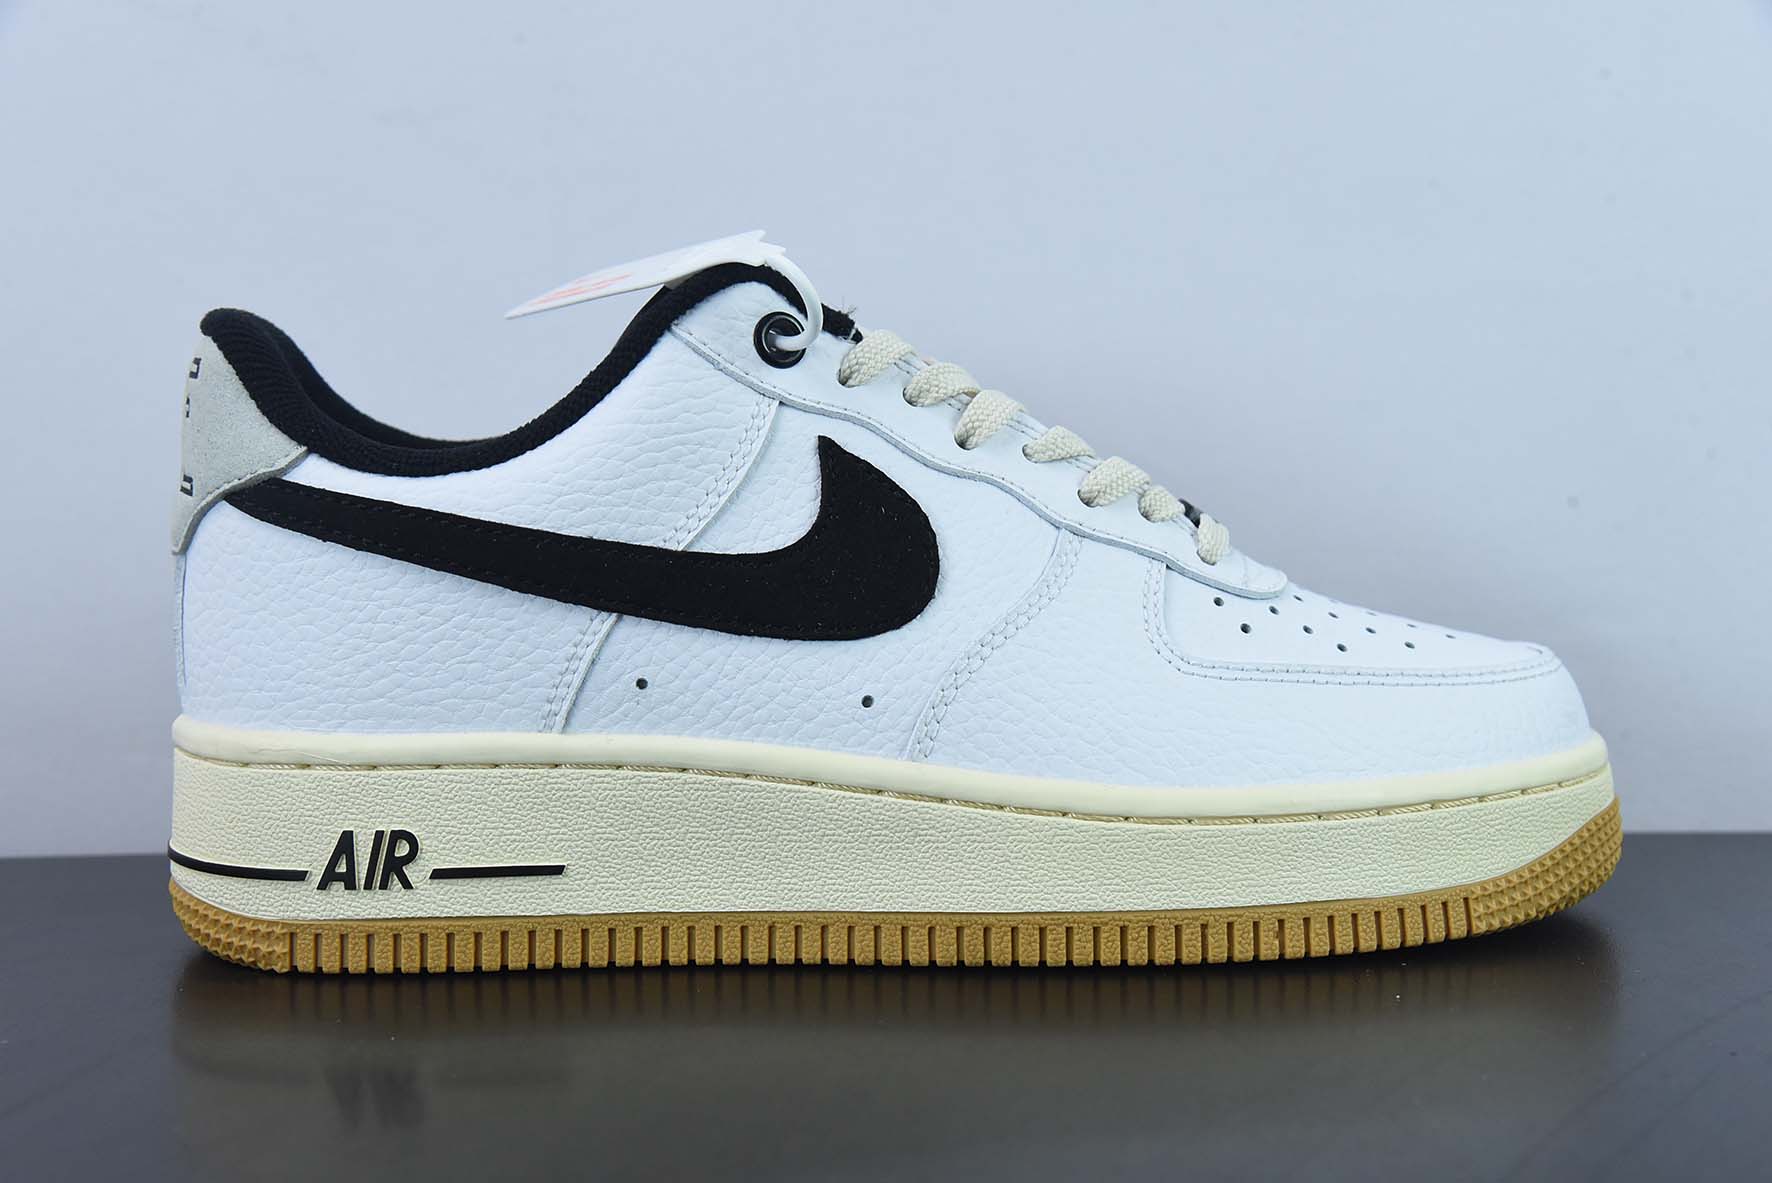 NIKE AIR FORCE 1 – “COMMAND FORCE”